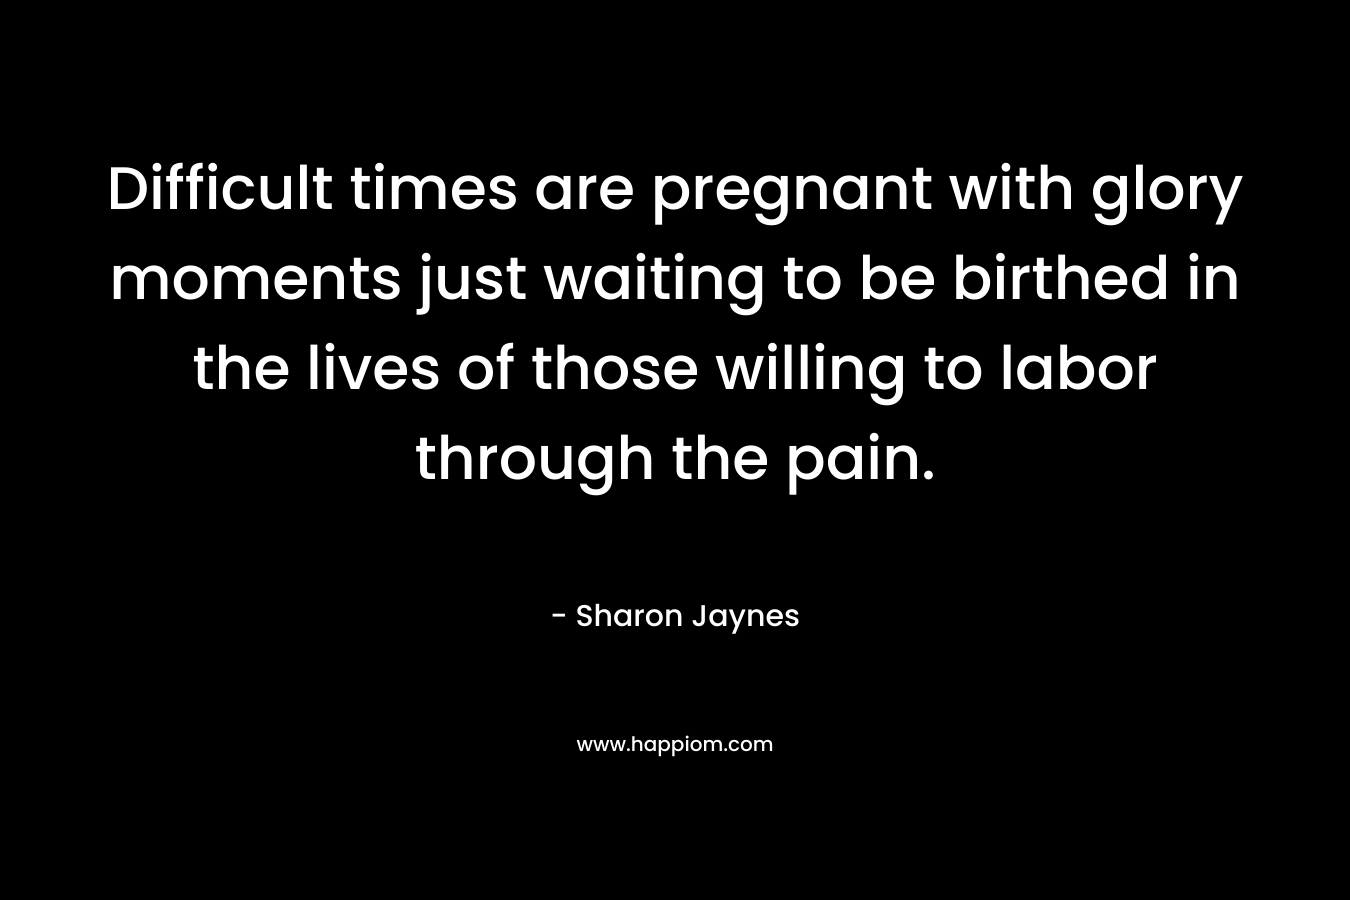 Difficult times are pregnant with glory moments just waiting to be birthed in the lives of those willing to labor through the pain. – Sharon Jaynes